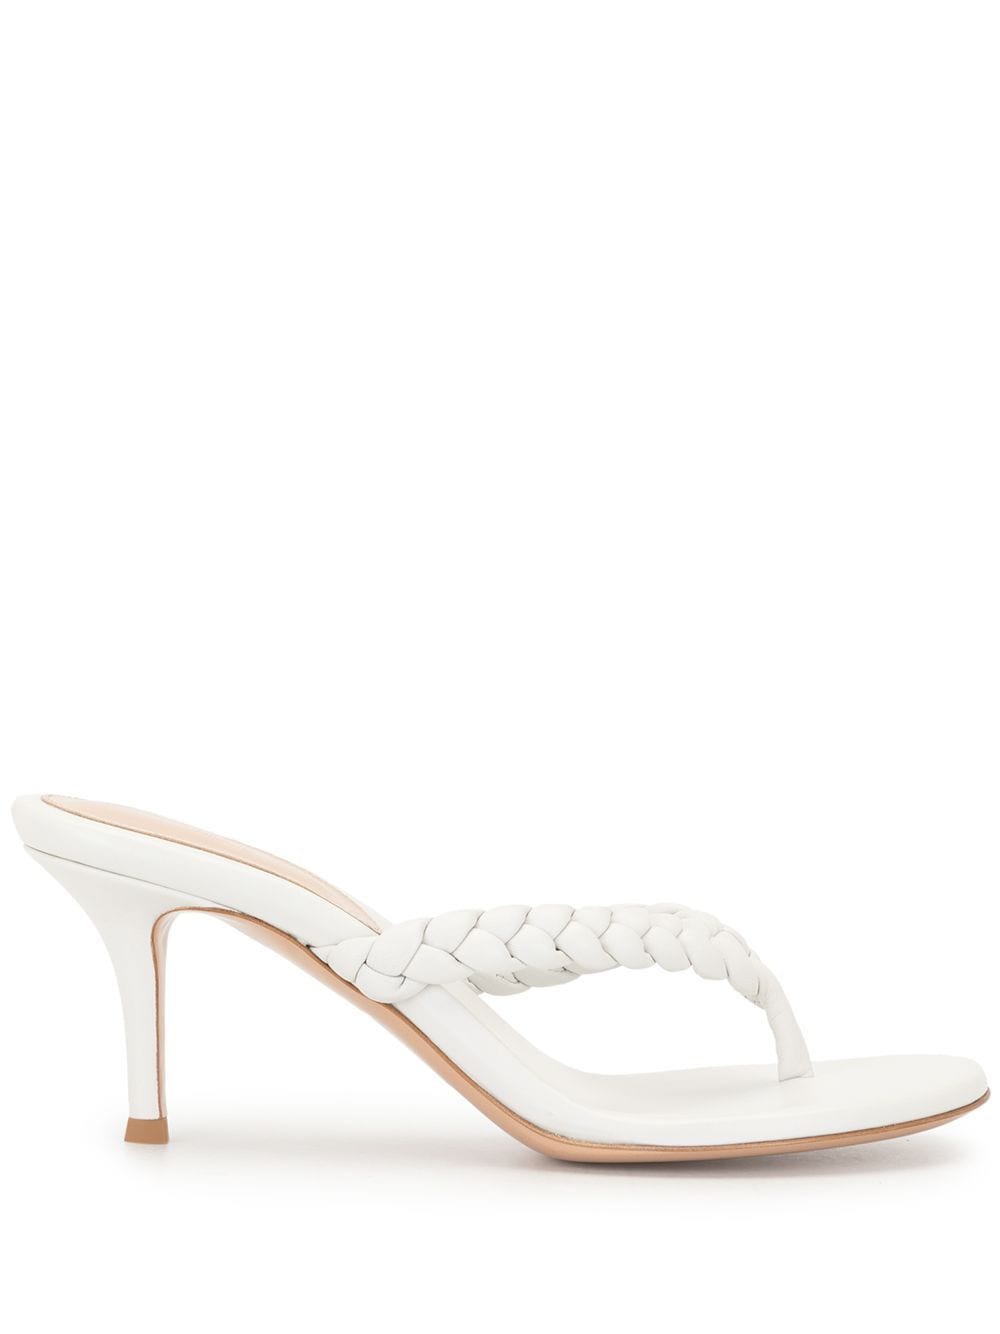 Image 1 of Gianvito Rossi Tropea 70mm braided thong mules